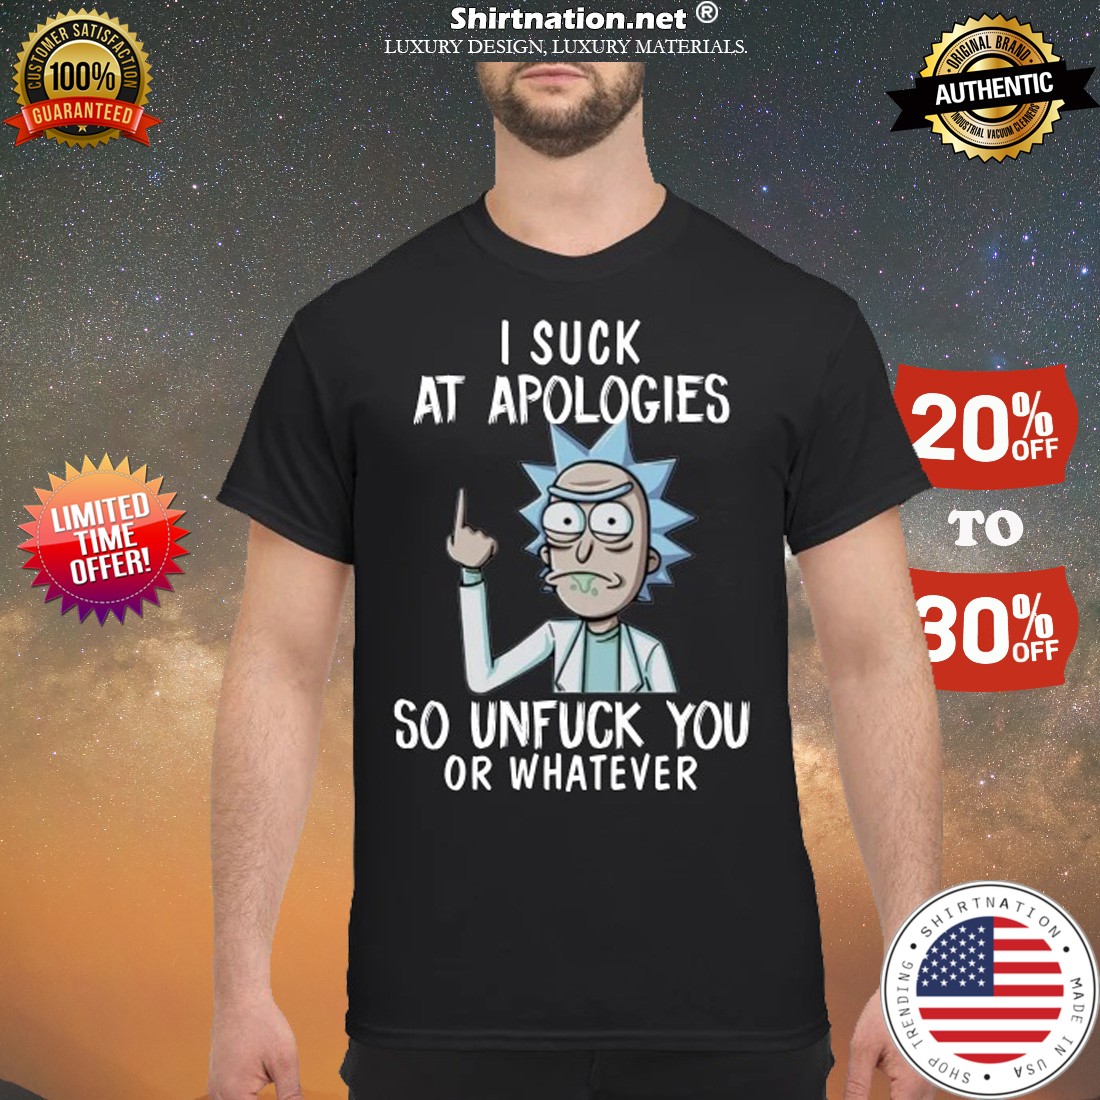 Rick Sanchez I suck at apologies so unfuck you or whatever shirt